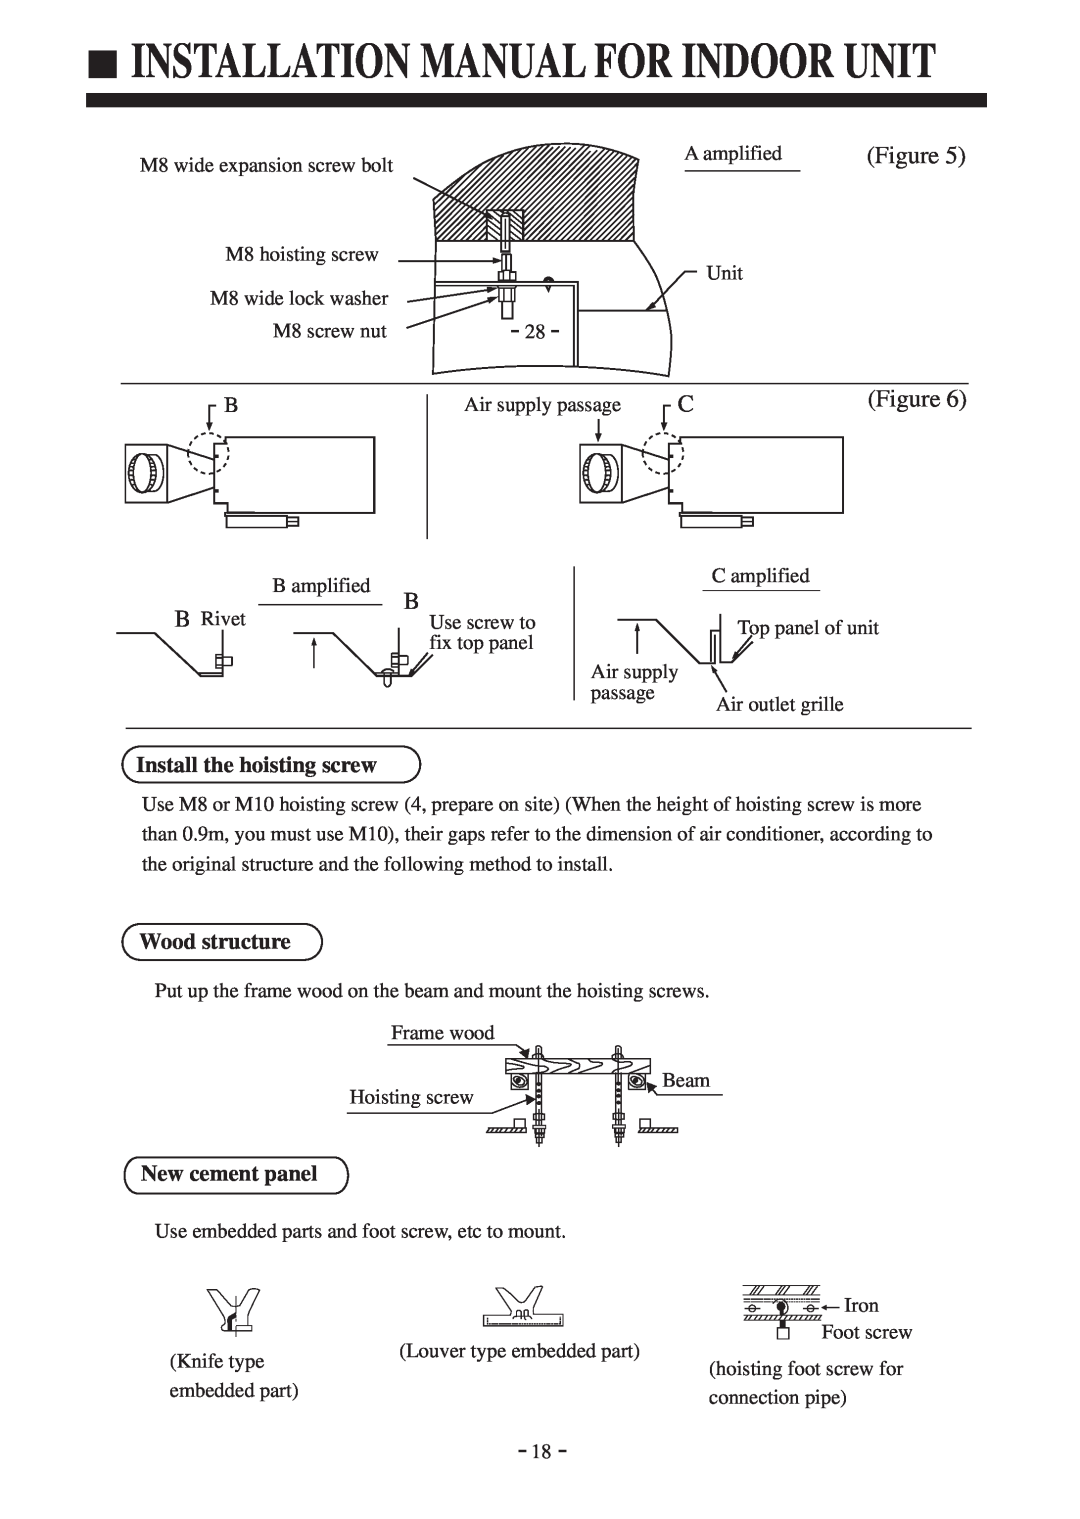 Haier AU142AFBIA Installation Manual For Indoor Unit, Install the hoisting screw, Wood structure, New cement panel 